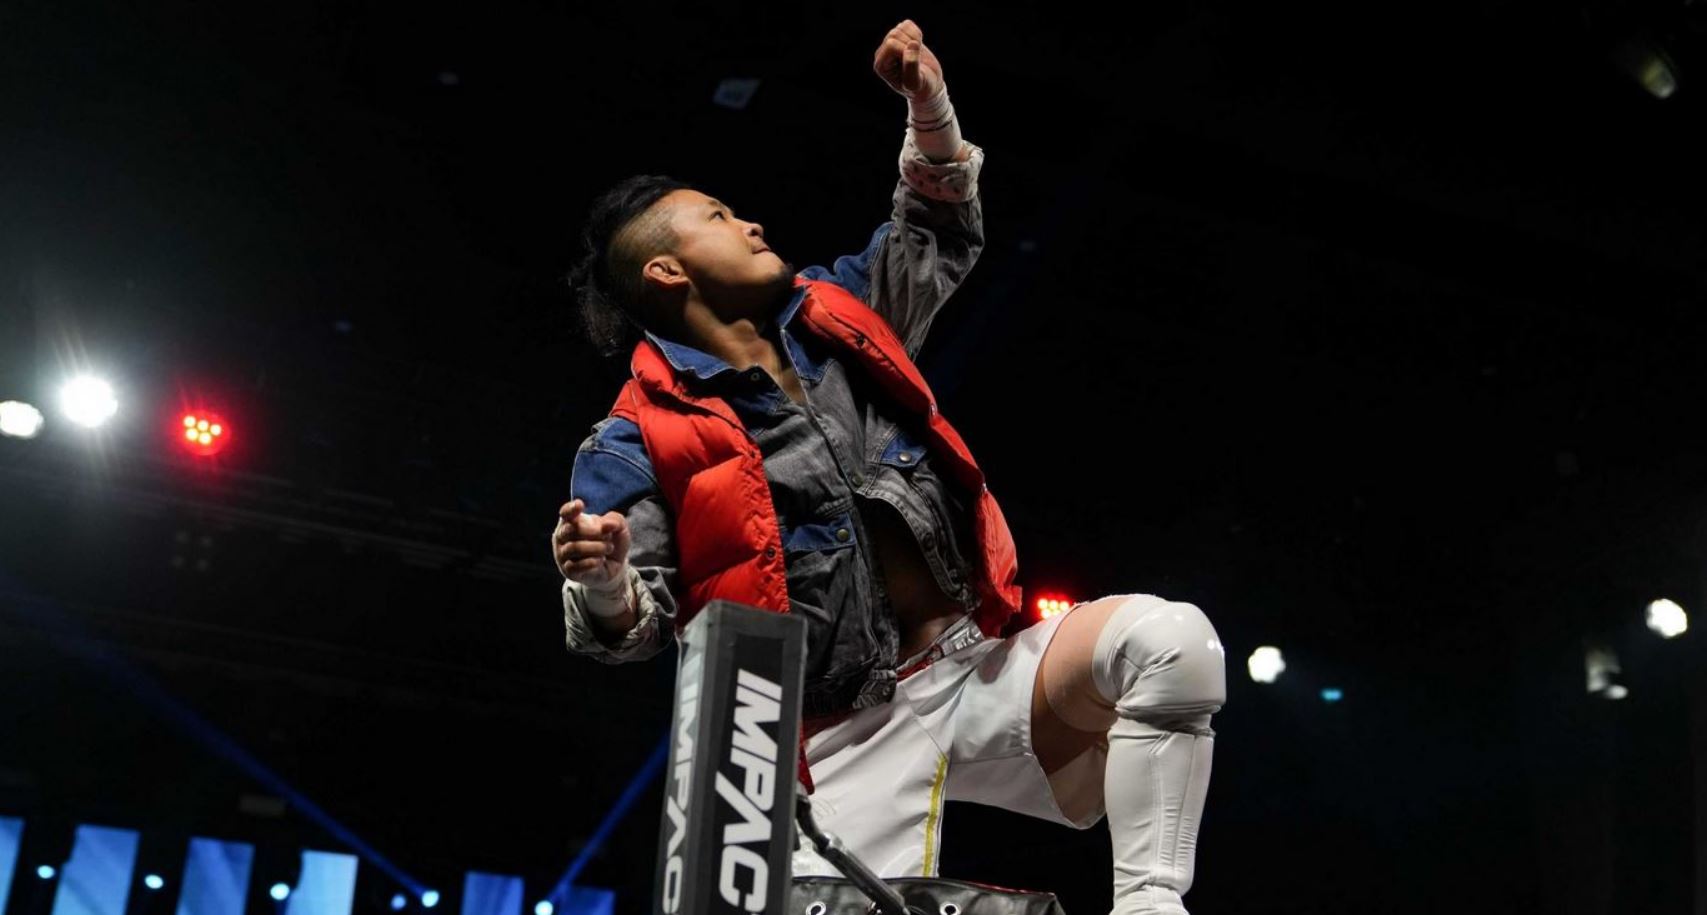 KUSHIDA Still Not Approved To Compete, Withdrawn From NJPW’s Sunday Event In Kobe